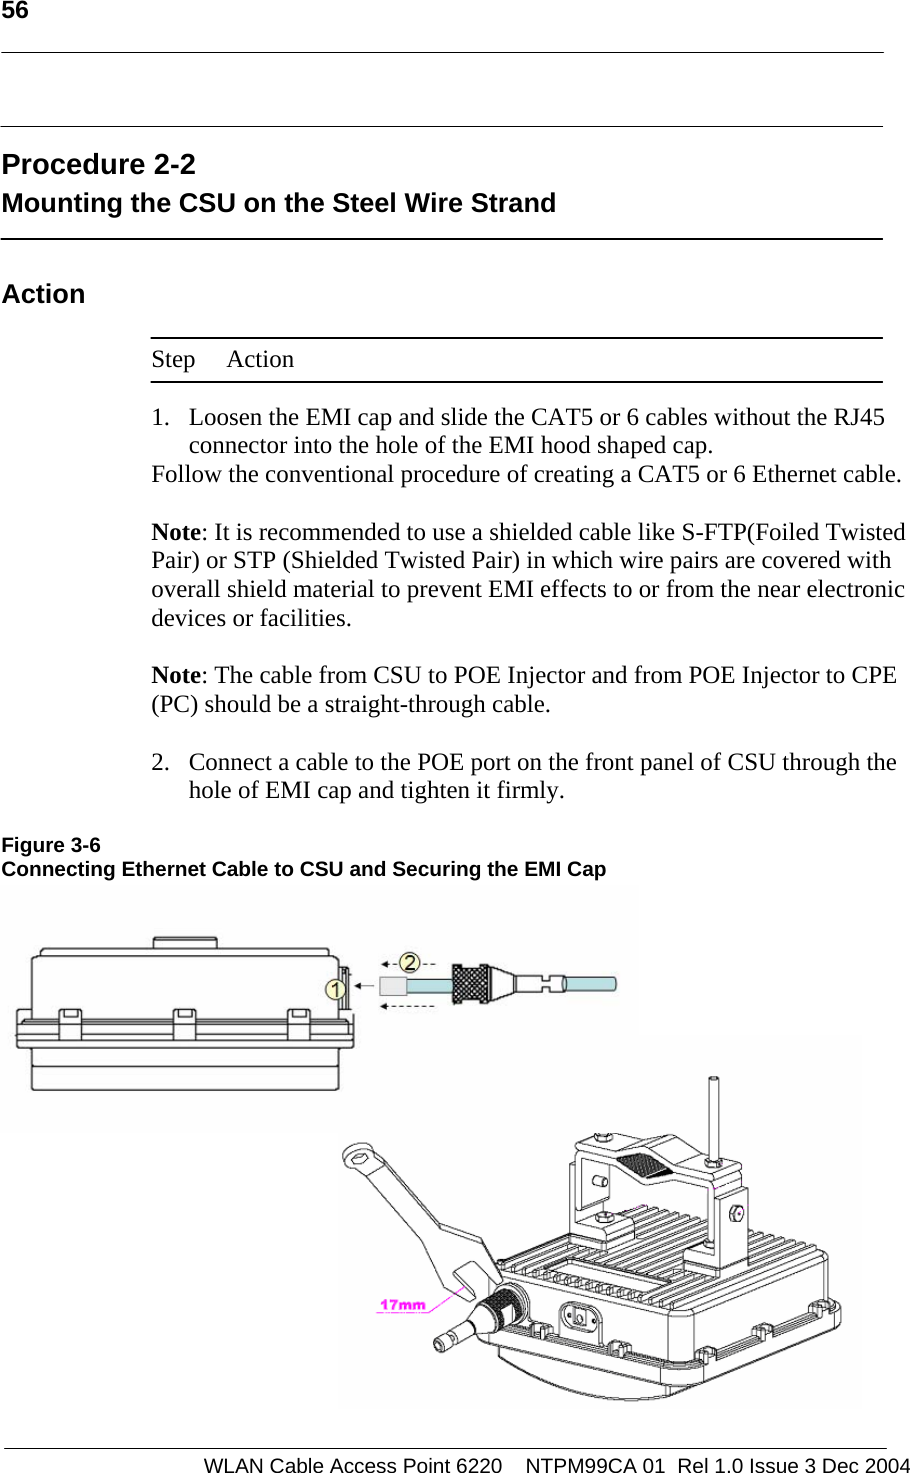   56    WLAN Cable Access Point 6220    NTPM99CA 01  Rel 1.0 Issue 3 Dec 2004  Procedure 2-2 Mounting the CSU on the Steel Wire Strand  Action  Step Action  1. Loosen the EMI cap and slide the CAT5 or 6 cables without the RJ45 connector into the hole of the EMI hood shaped cap. Follow the conventional procedure of creating a CAT5 or 6 Ethernet cable.  Note: It is recommended to use a shielded cable like S-FTP(Foiled Twisted Pair) or STP (Shielded Twisted Pair) in which wire pairs are covered with overall shield material to prevent EMI effects to or from the near electronic devices or facilities.    Note: The cable from CSU to POE Injector and from POE Injector to CPE (PC) should be a straight-through cable.   2. Connect a cable to the POE port on the front panel of CSU through the hole of EMI cap and tighten it firmly.  Figure 3-6 Connecting Ethernet Cable to CSU and Securing the EMI Cap           